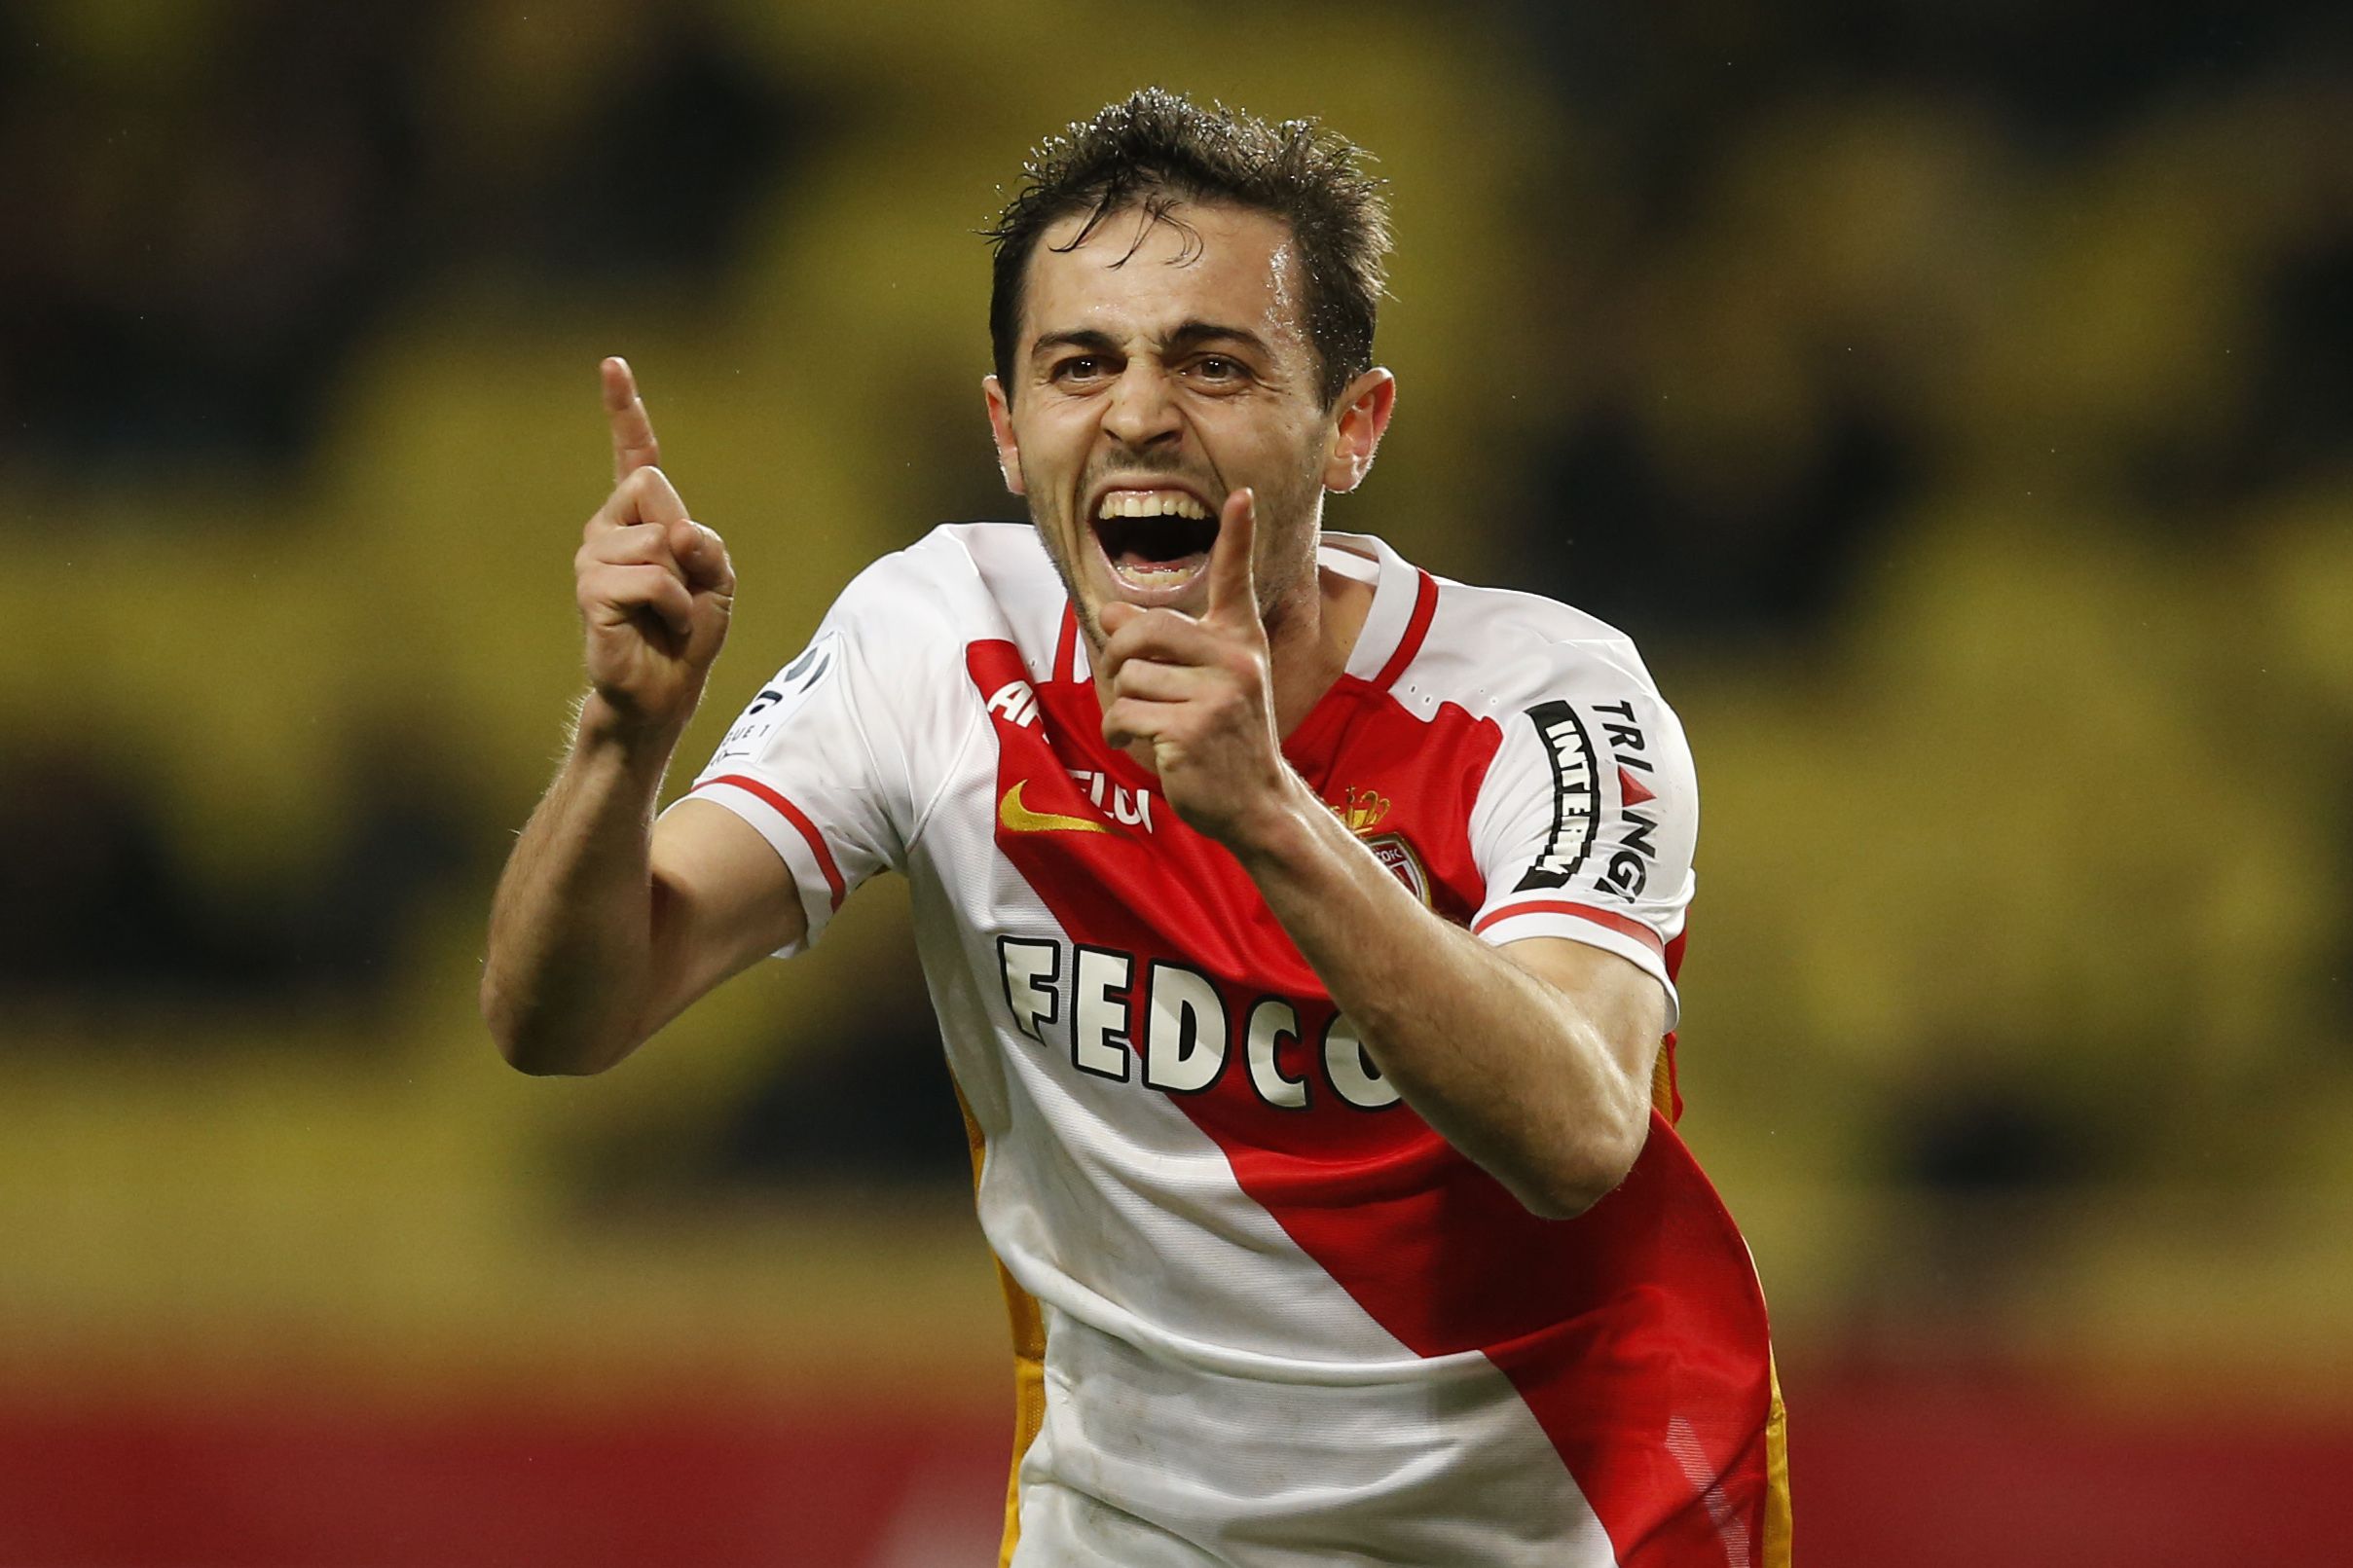 Proceeds from Memphis and Schneiderlin's sales would barely cover half the purported price for AS Monaco's Bernardo Silva